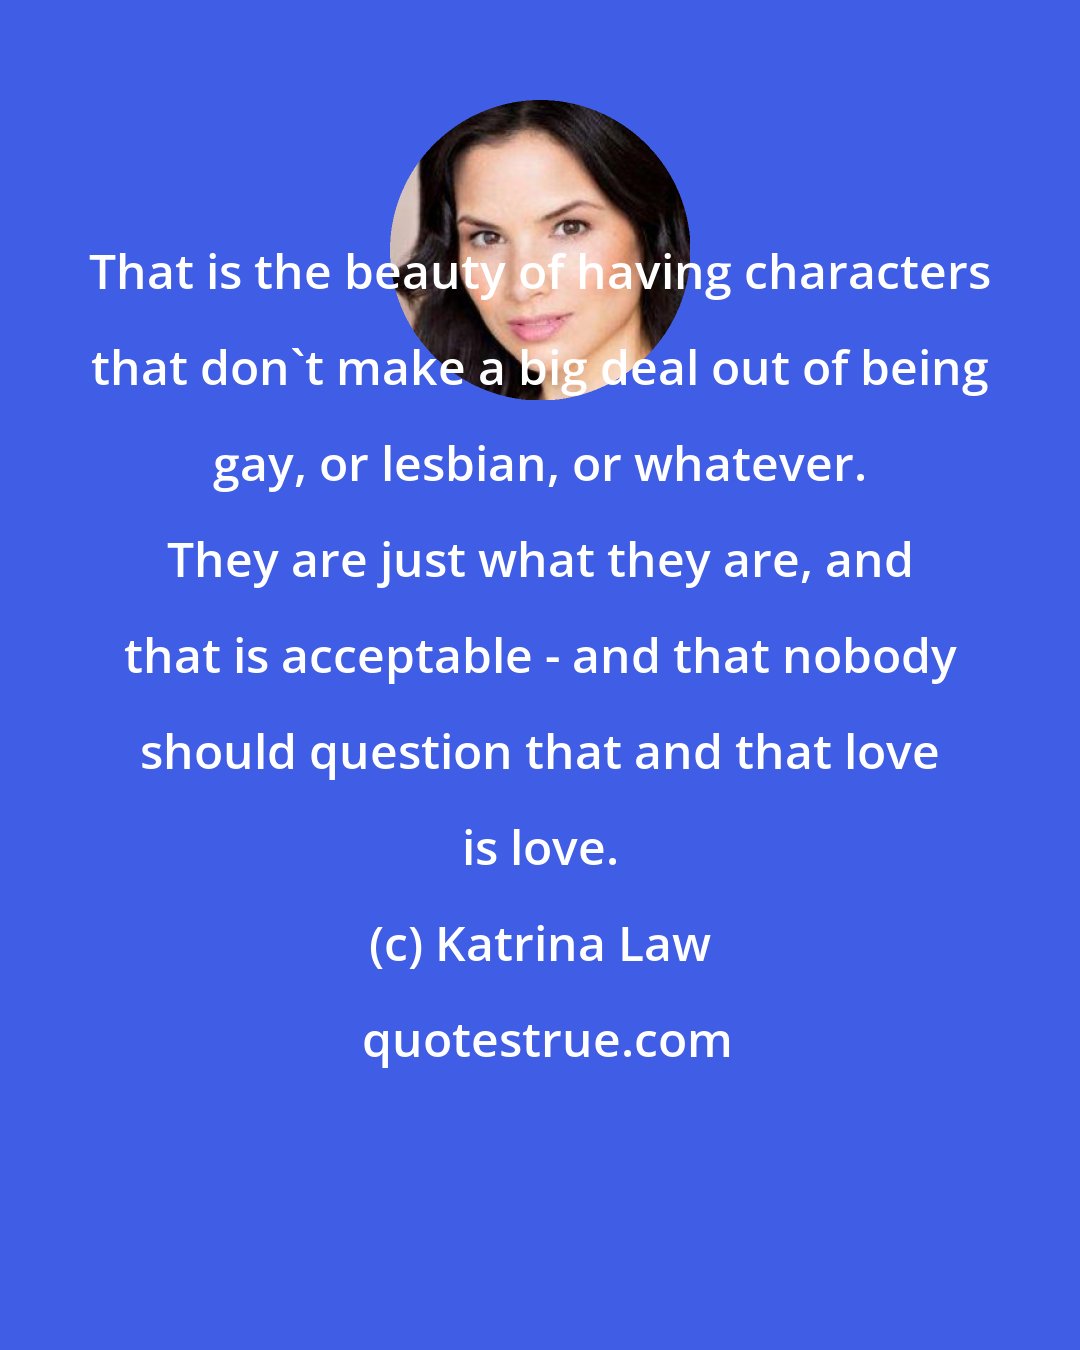 Katrina Law: That is the beauty of having characters that don't make a big deal out of being gay, or lesbian, or whatever. They are just what they are, and that is acceptable - and that nobody should question that and that love is love.